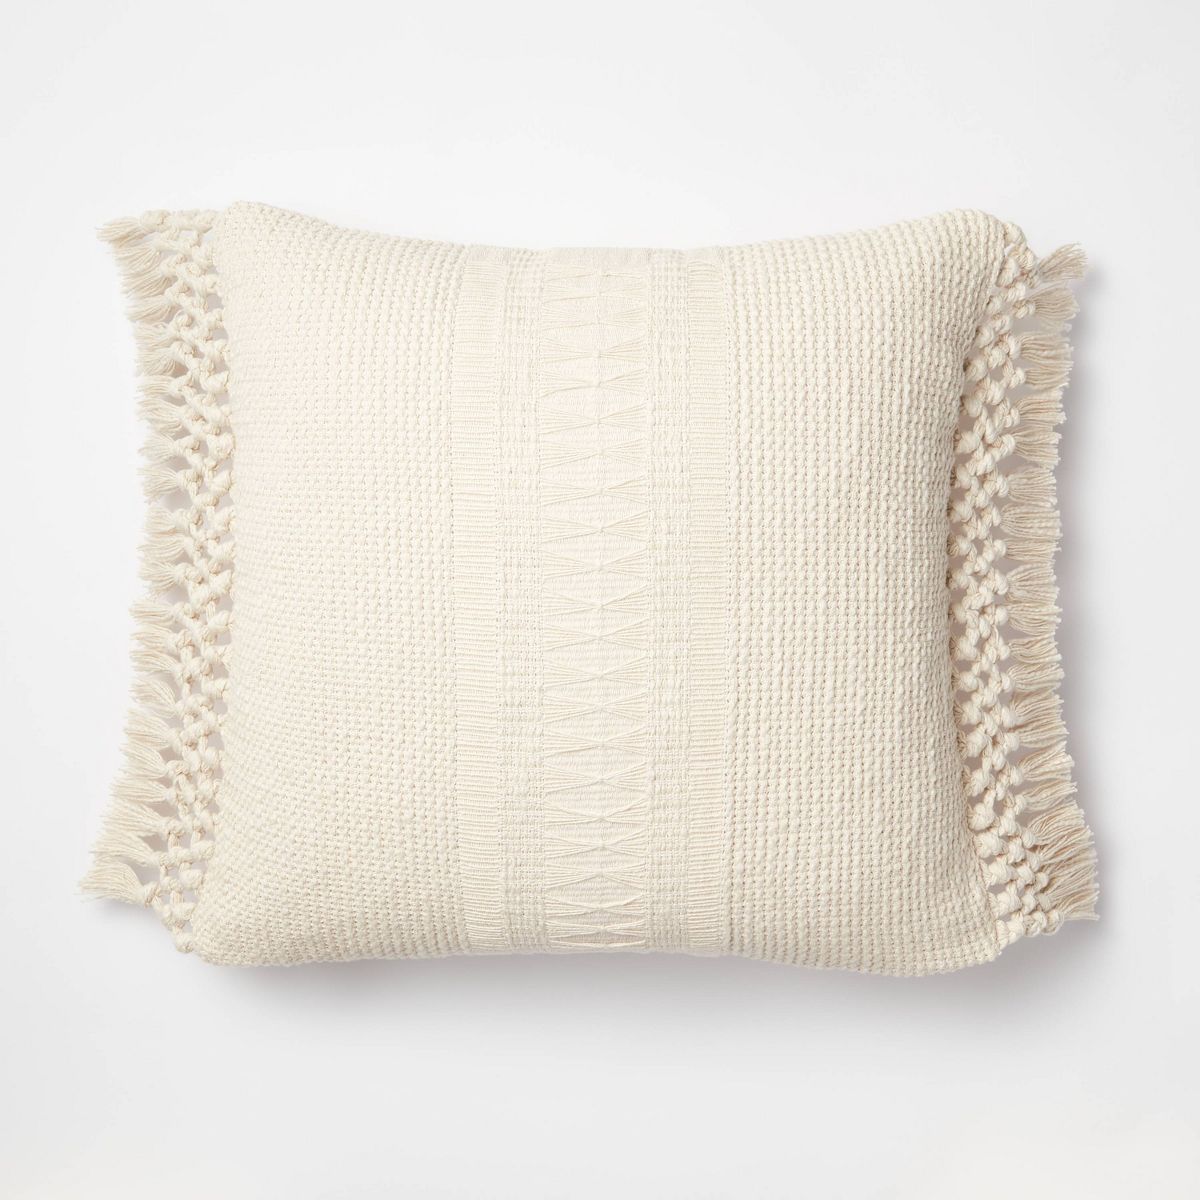 Square Woven Textural Pillow with Crochet Trim Cream - Threshold™ designed with Studio McGee | Target